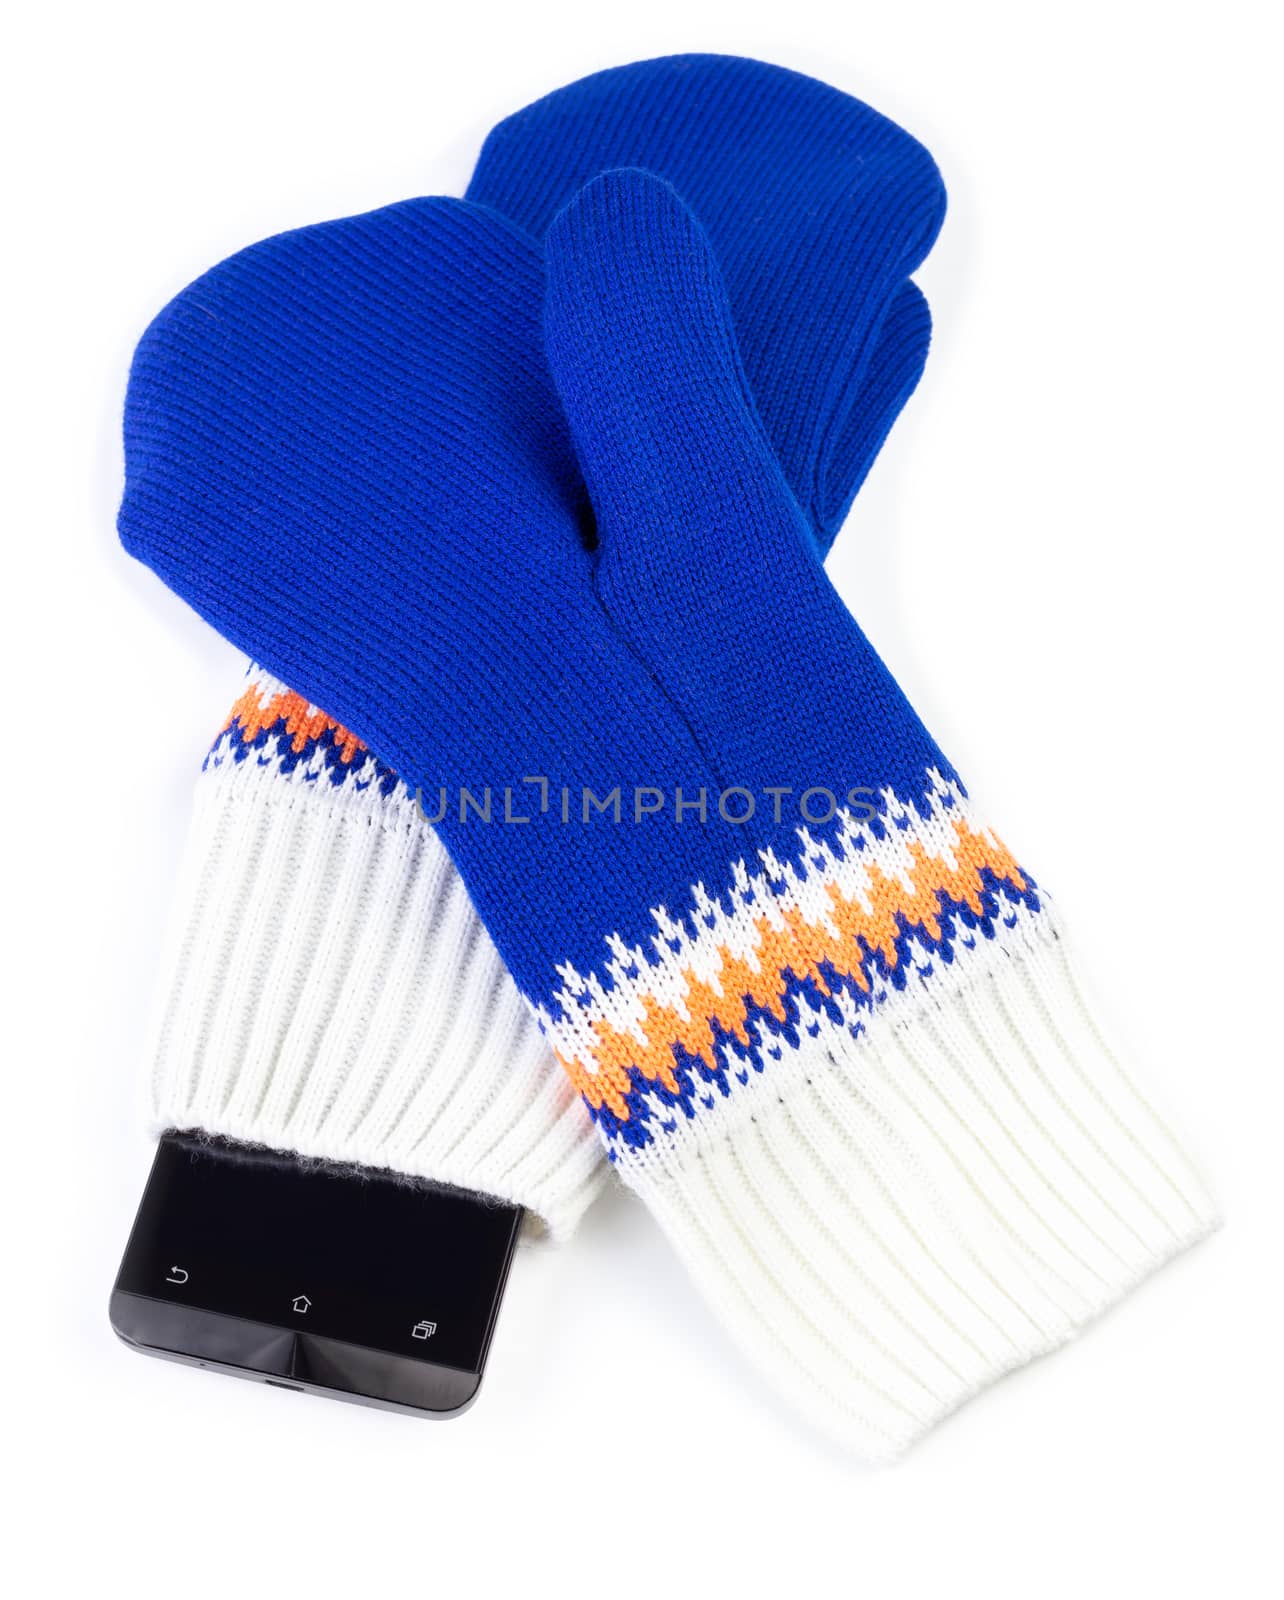 blue and white knited mittens with cellphone isolated on white background.